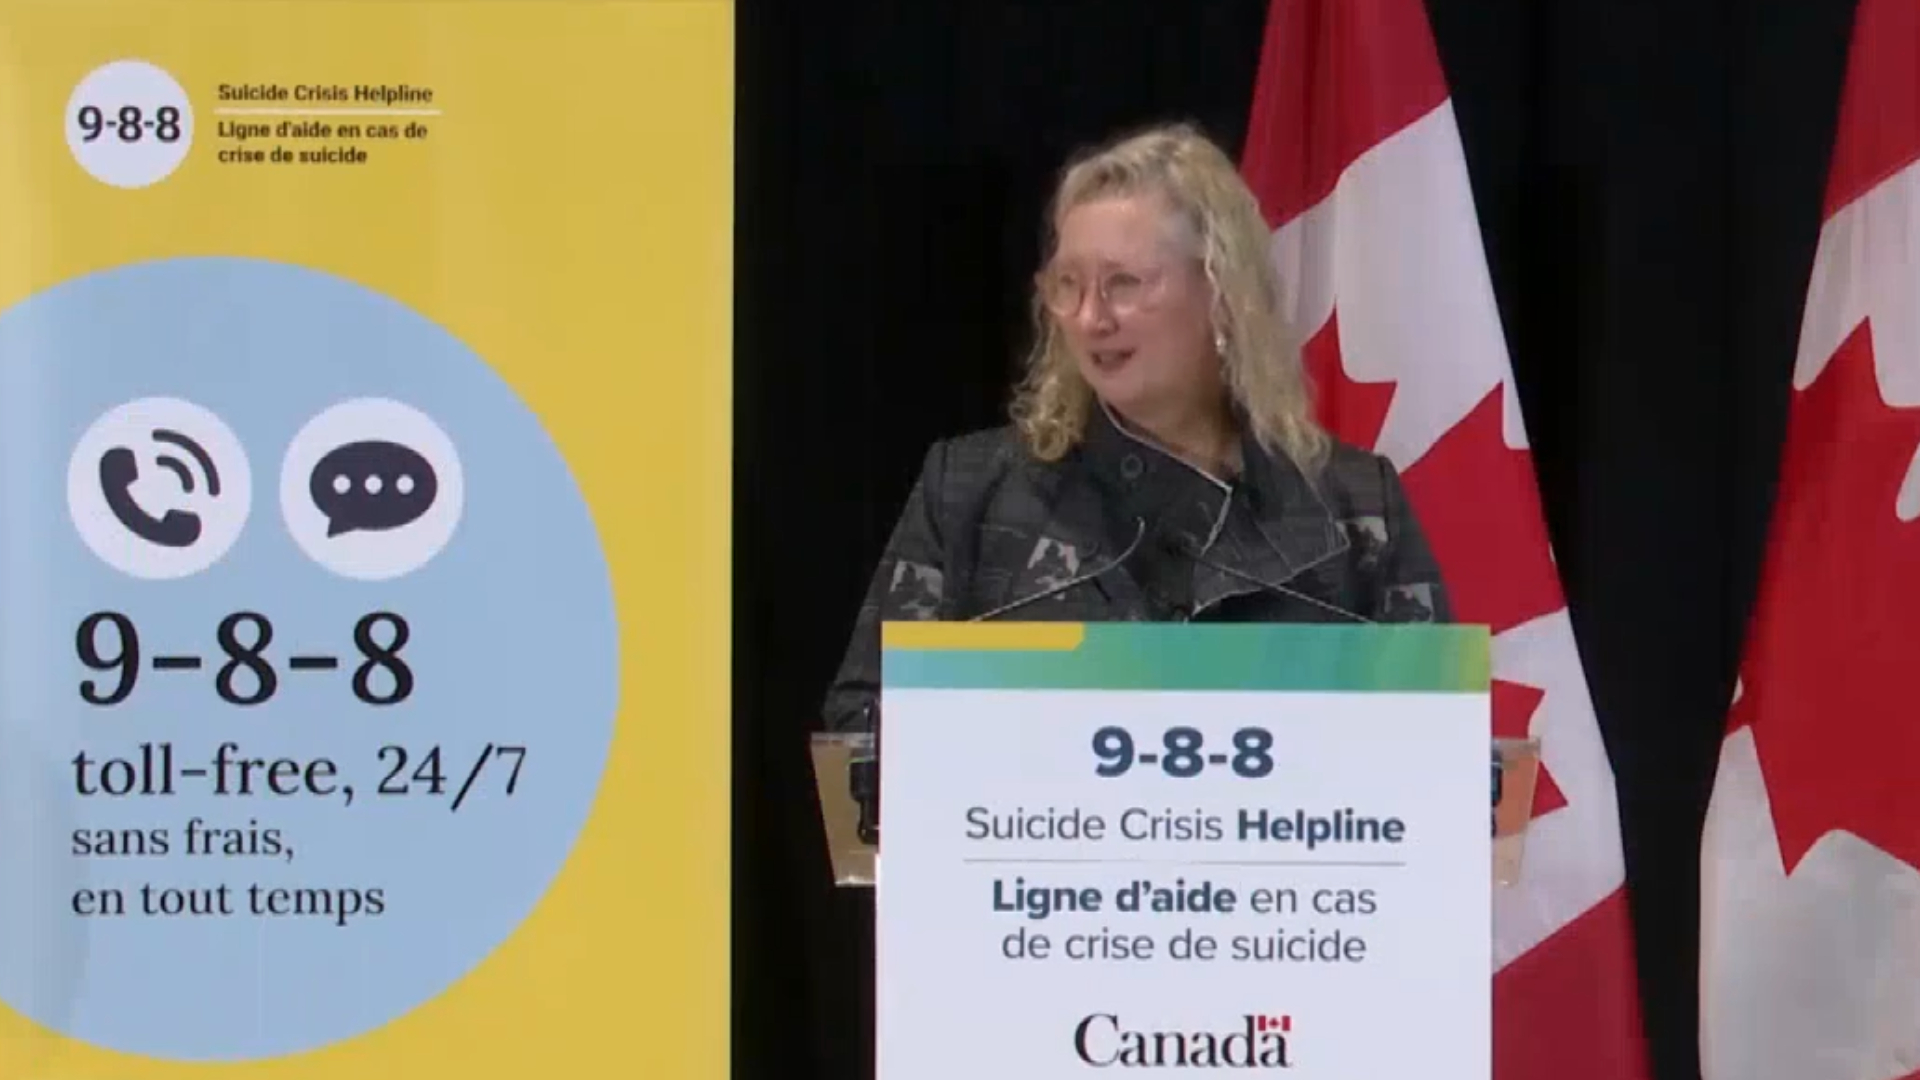 9-8-8 suicide prevention helpline now available to Edmontonians and all Canadians